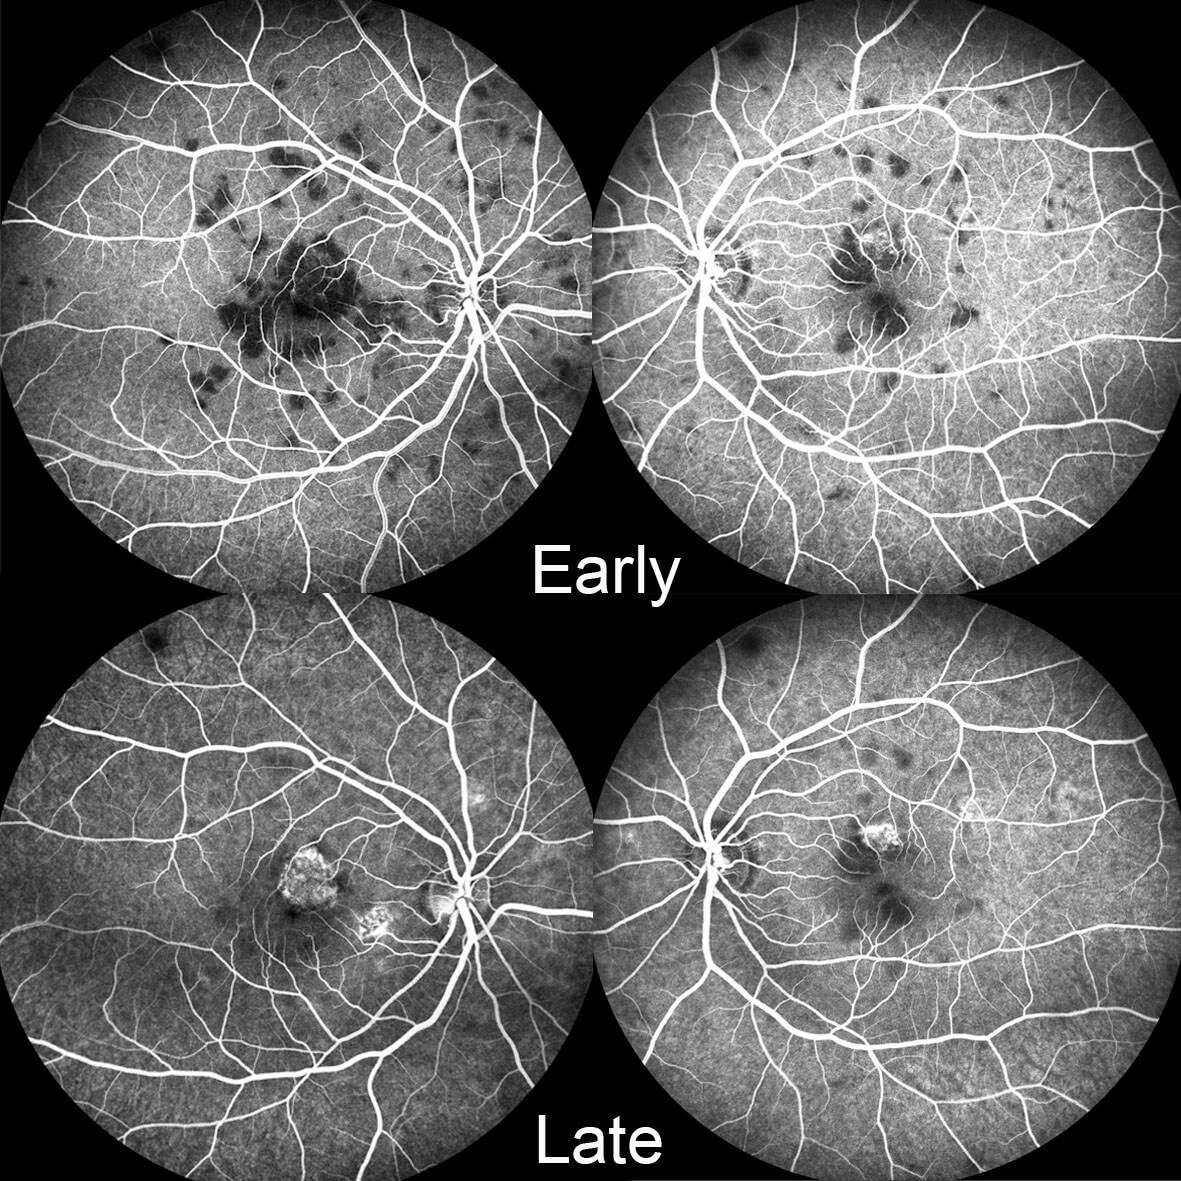 On fluorescein angiography the lesions are hypofluorescent early but hyperfluorescent in the late phases.